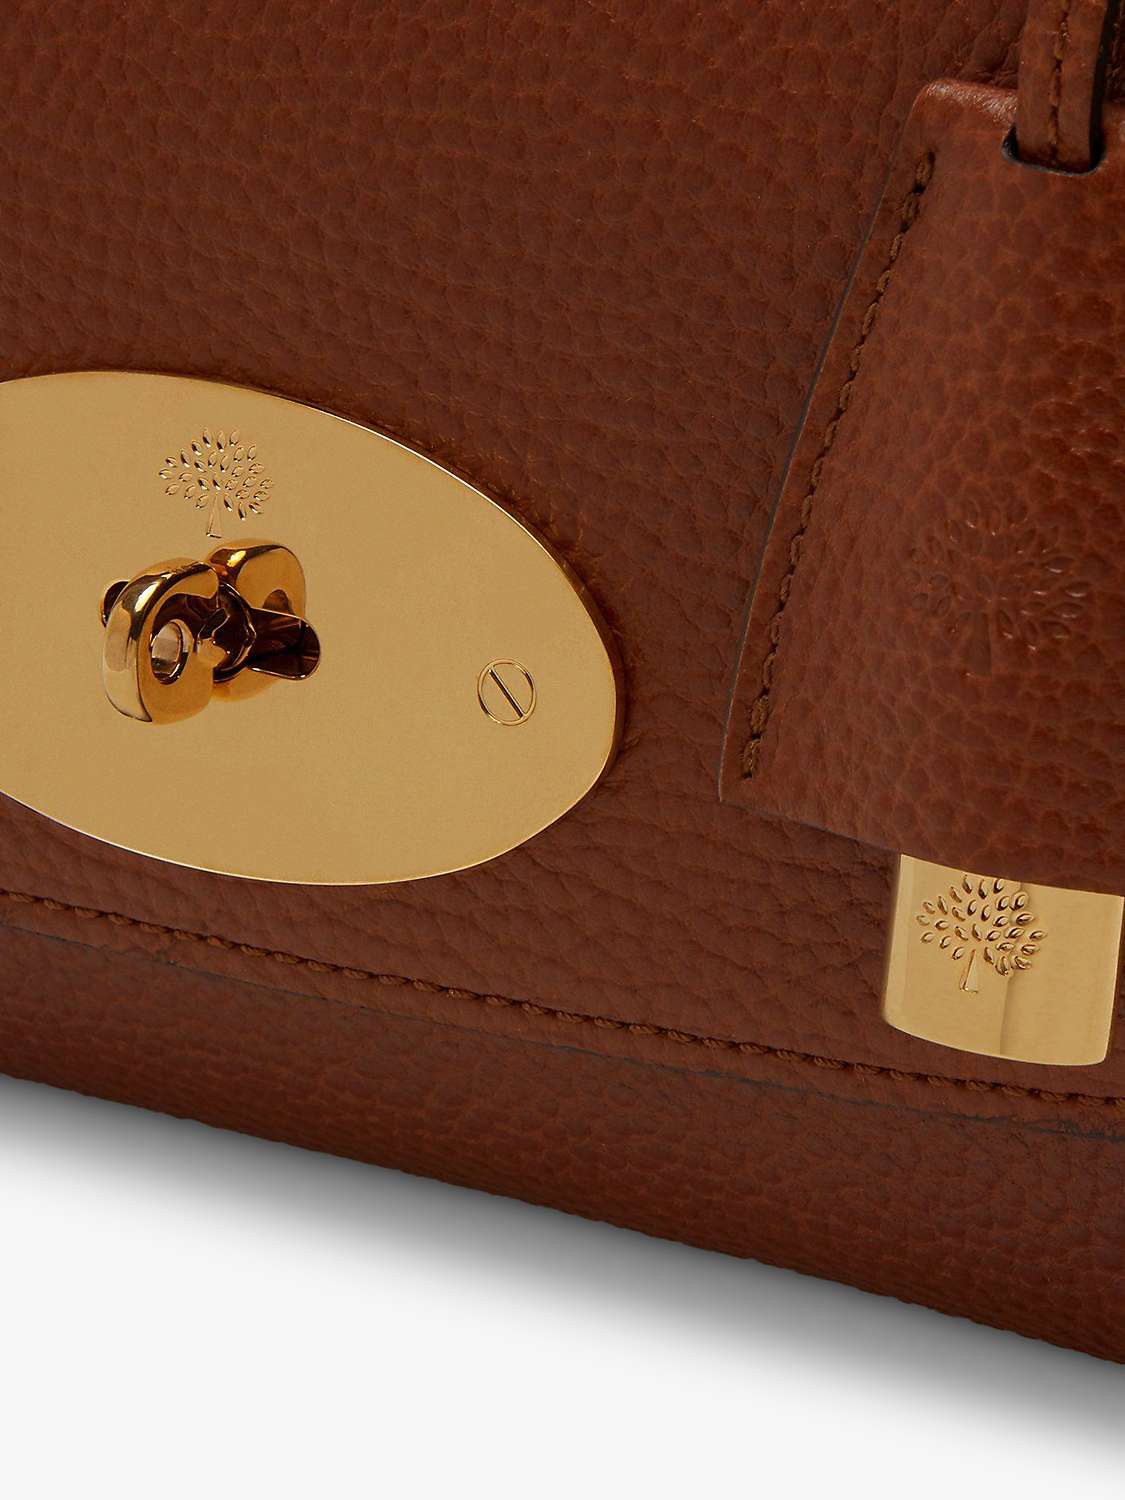 Buy Mulberry Lily Classic Grain Leather Shoulder Bag Online at johnlewis.com